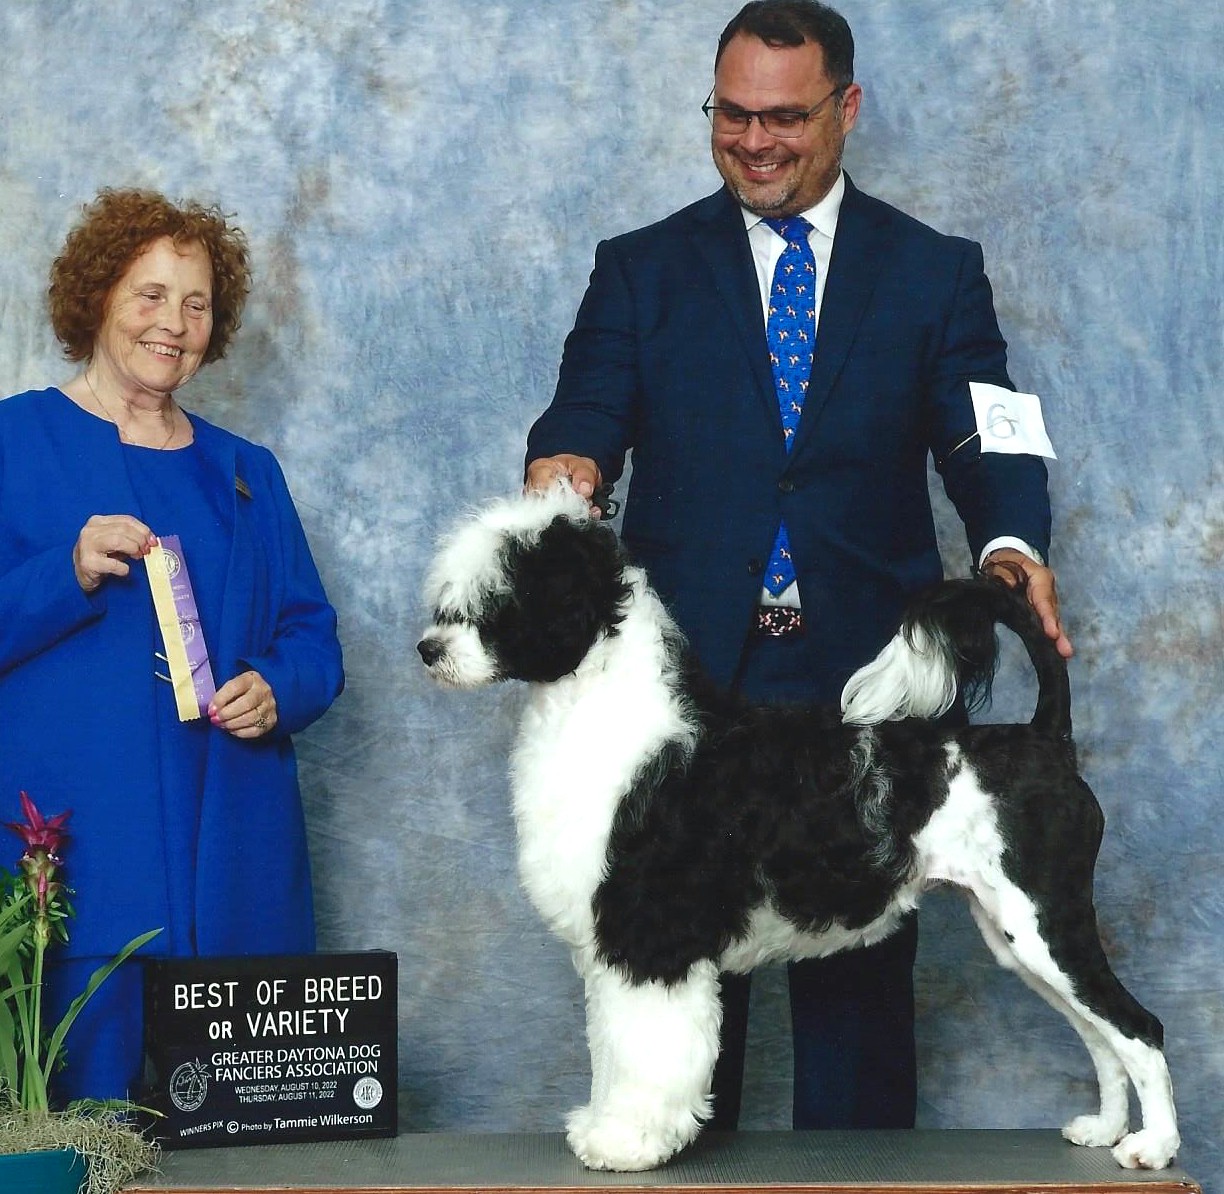 Reign, Portuguese Water Dog at Caladesi